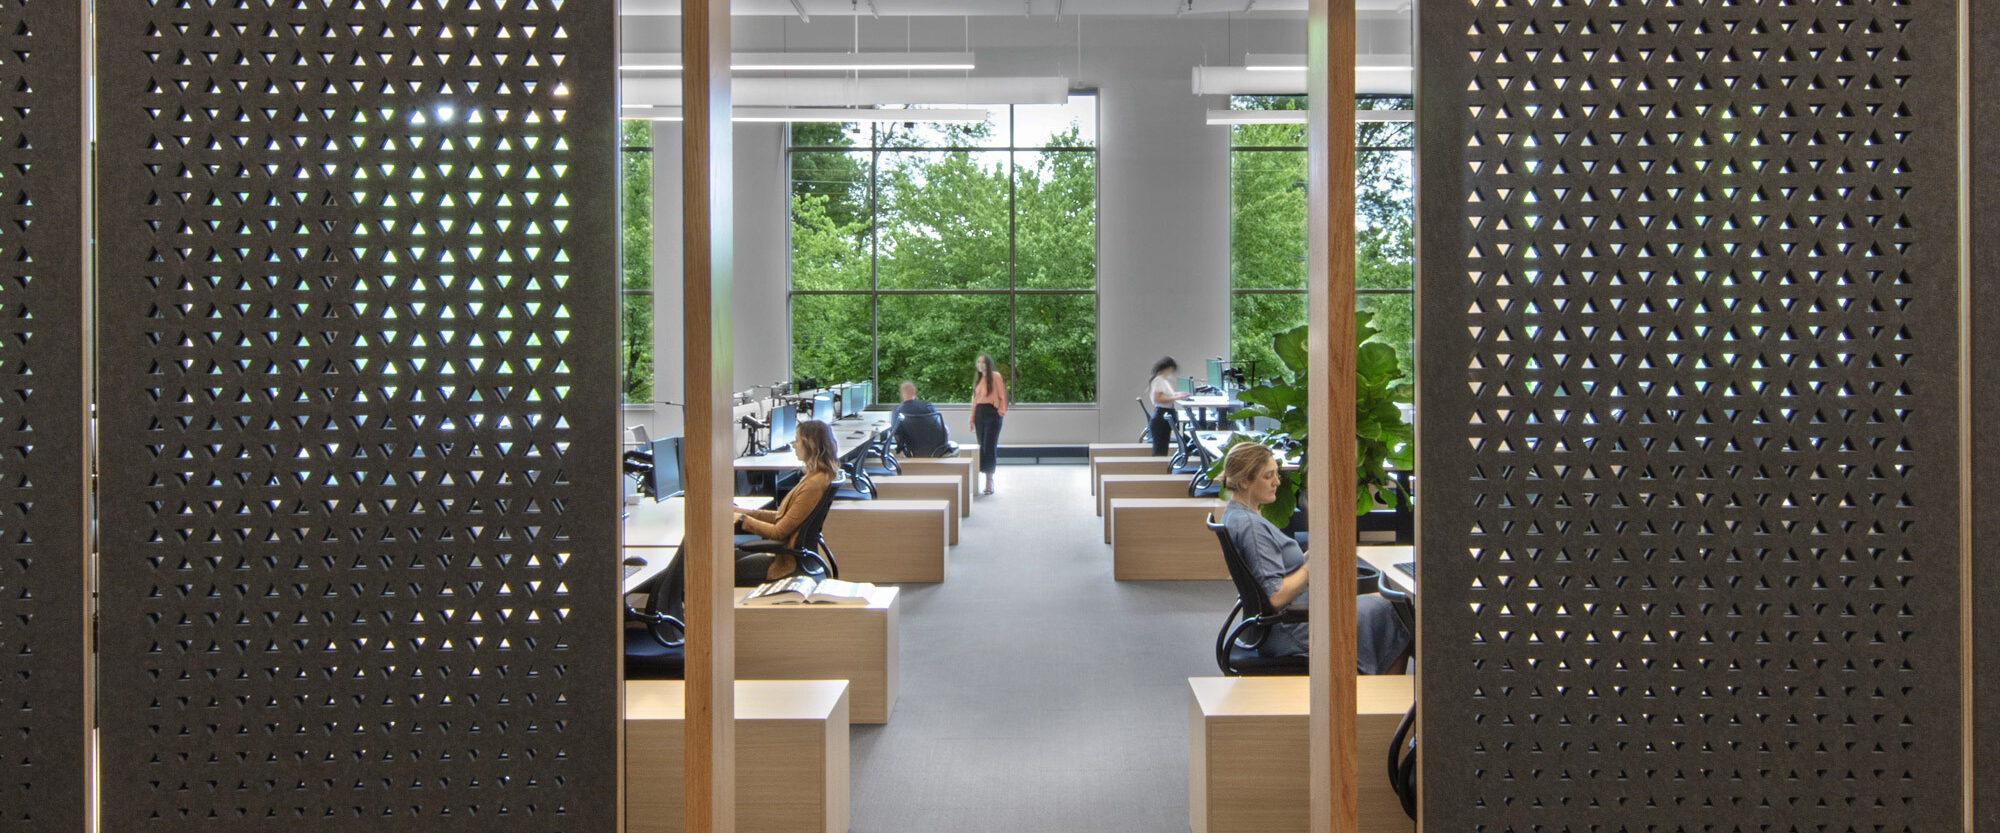 Modern open-plan office space featuring wooden privacy screens with intricate geometric cutouts, ergonomic workstations, and floor-to-ceiling windows providing ample natural light.